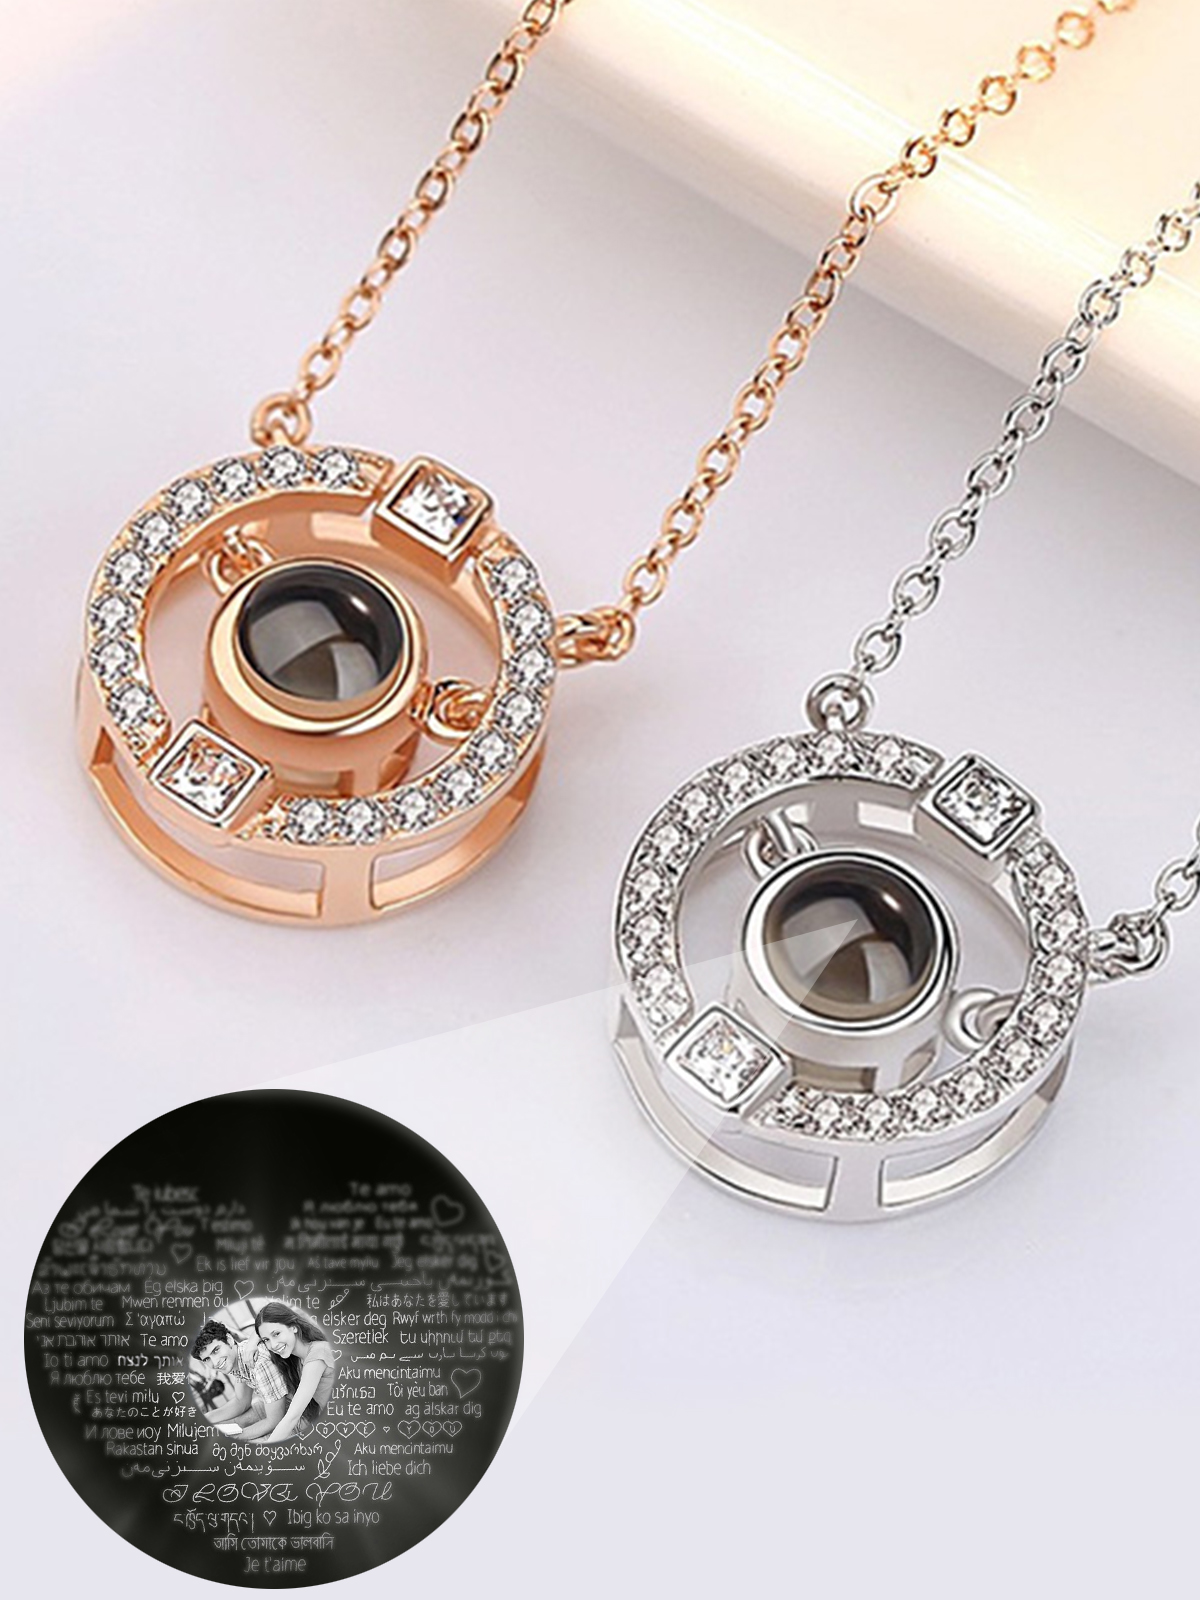 Personalized photographic projection necklace